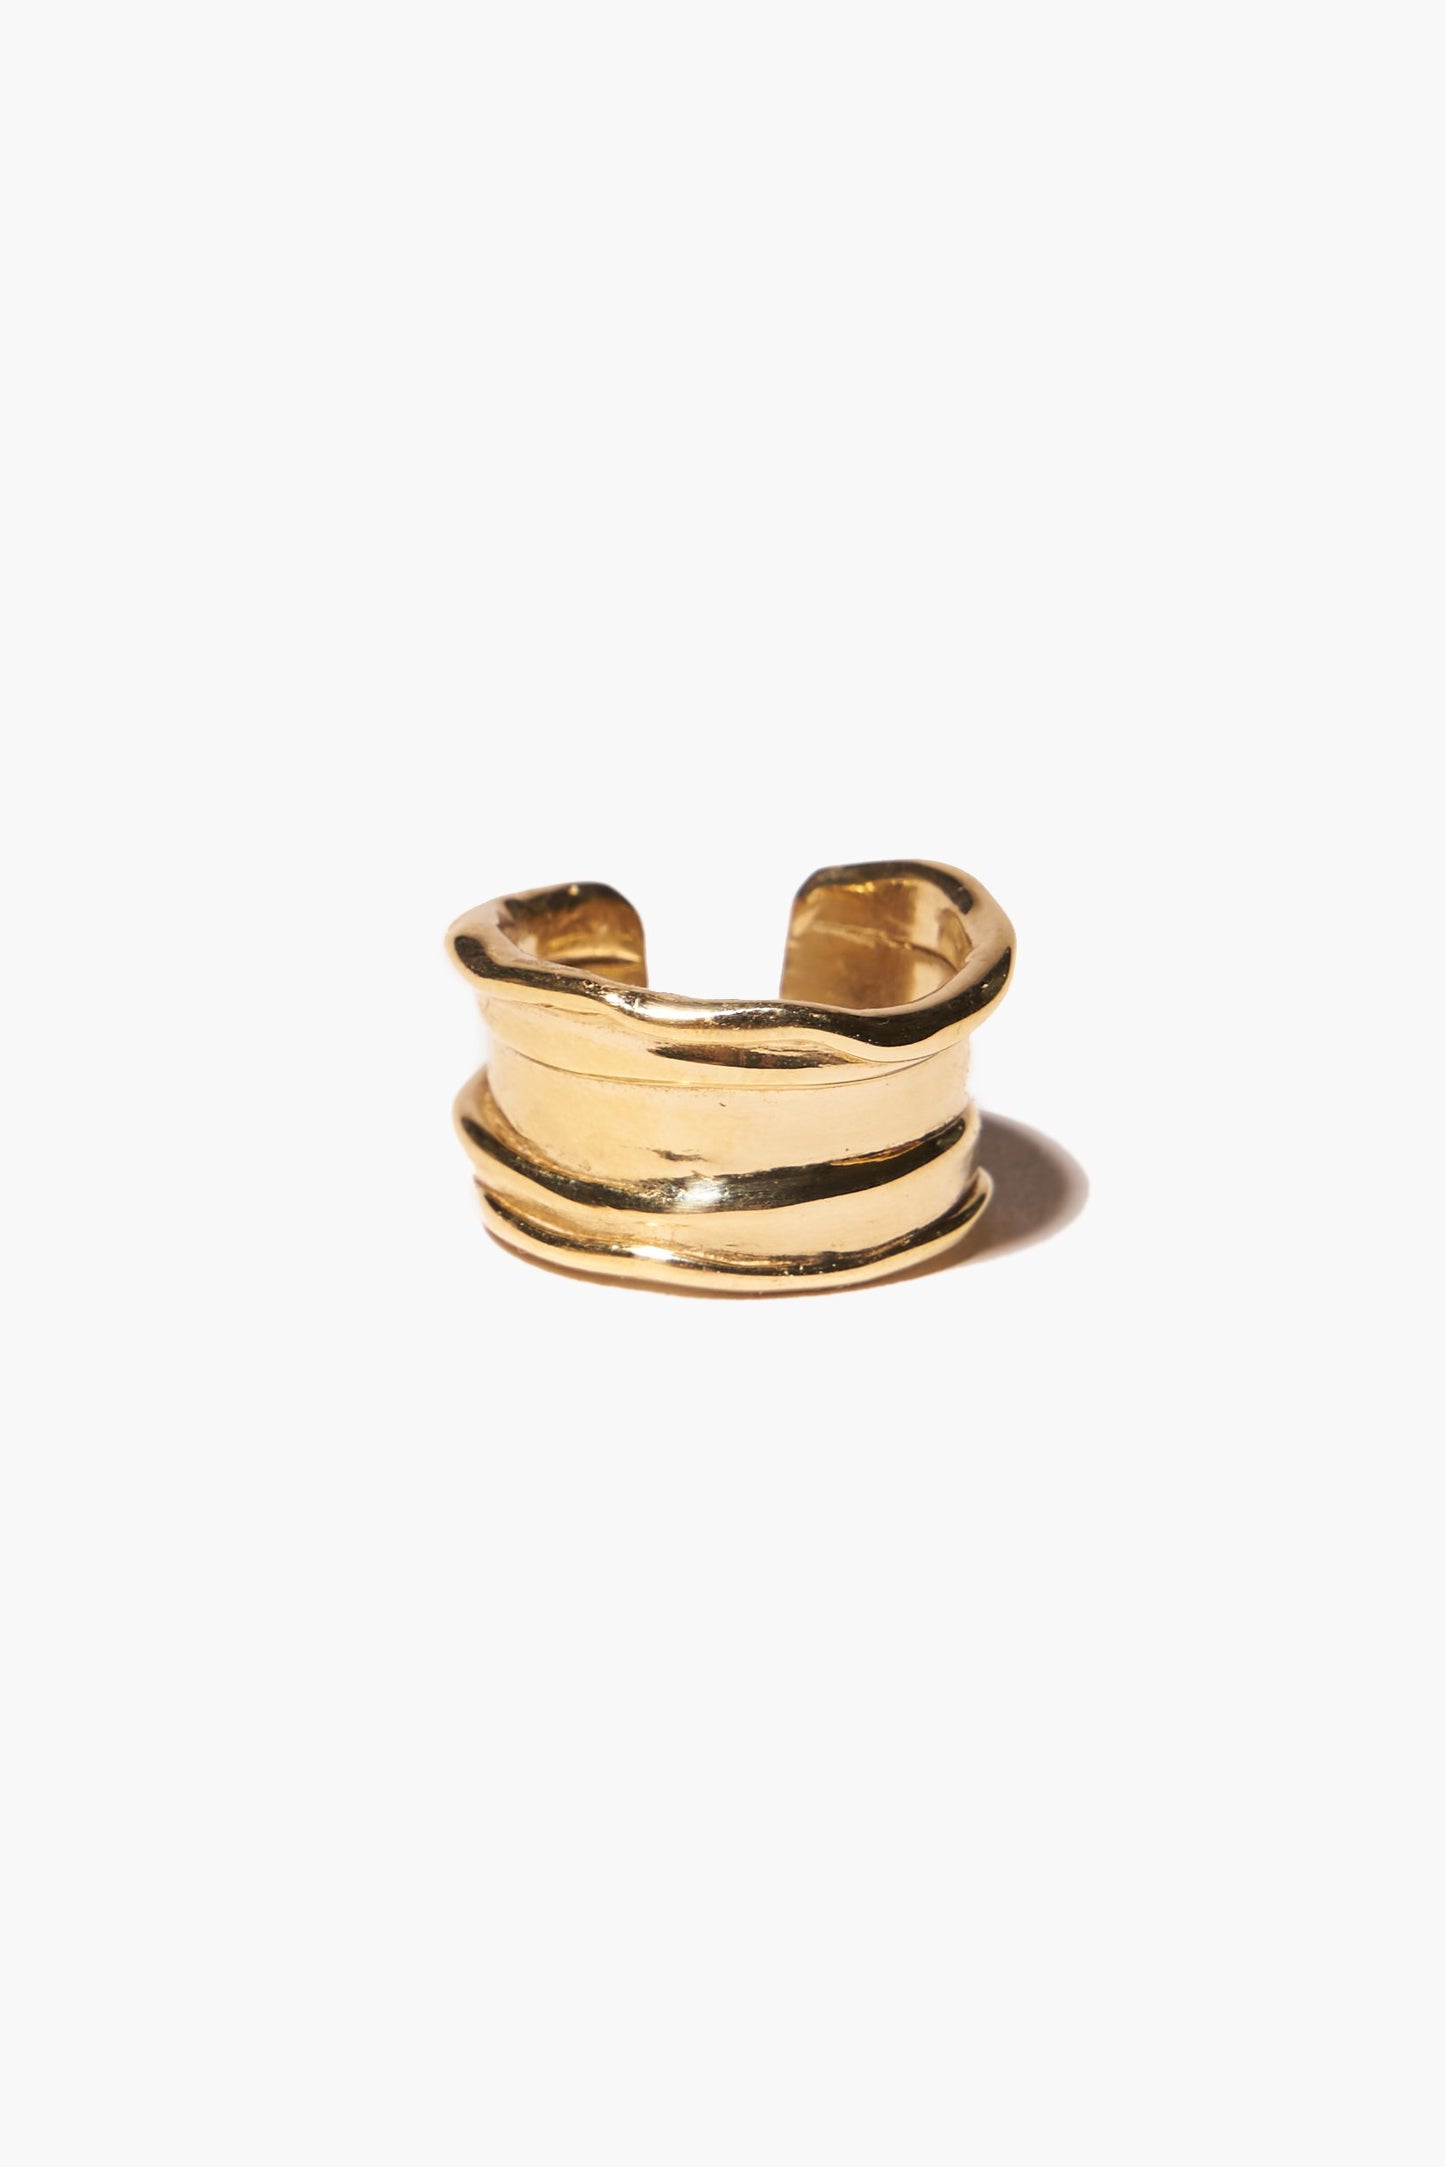 ODETTE_NY_Blanca_Chunky_Gold_Ring_Recycled-Brass_Handmade_in_USA